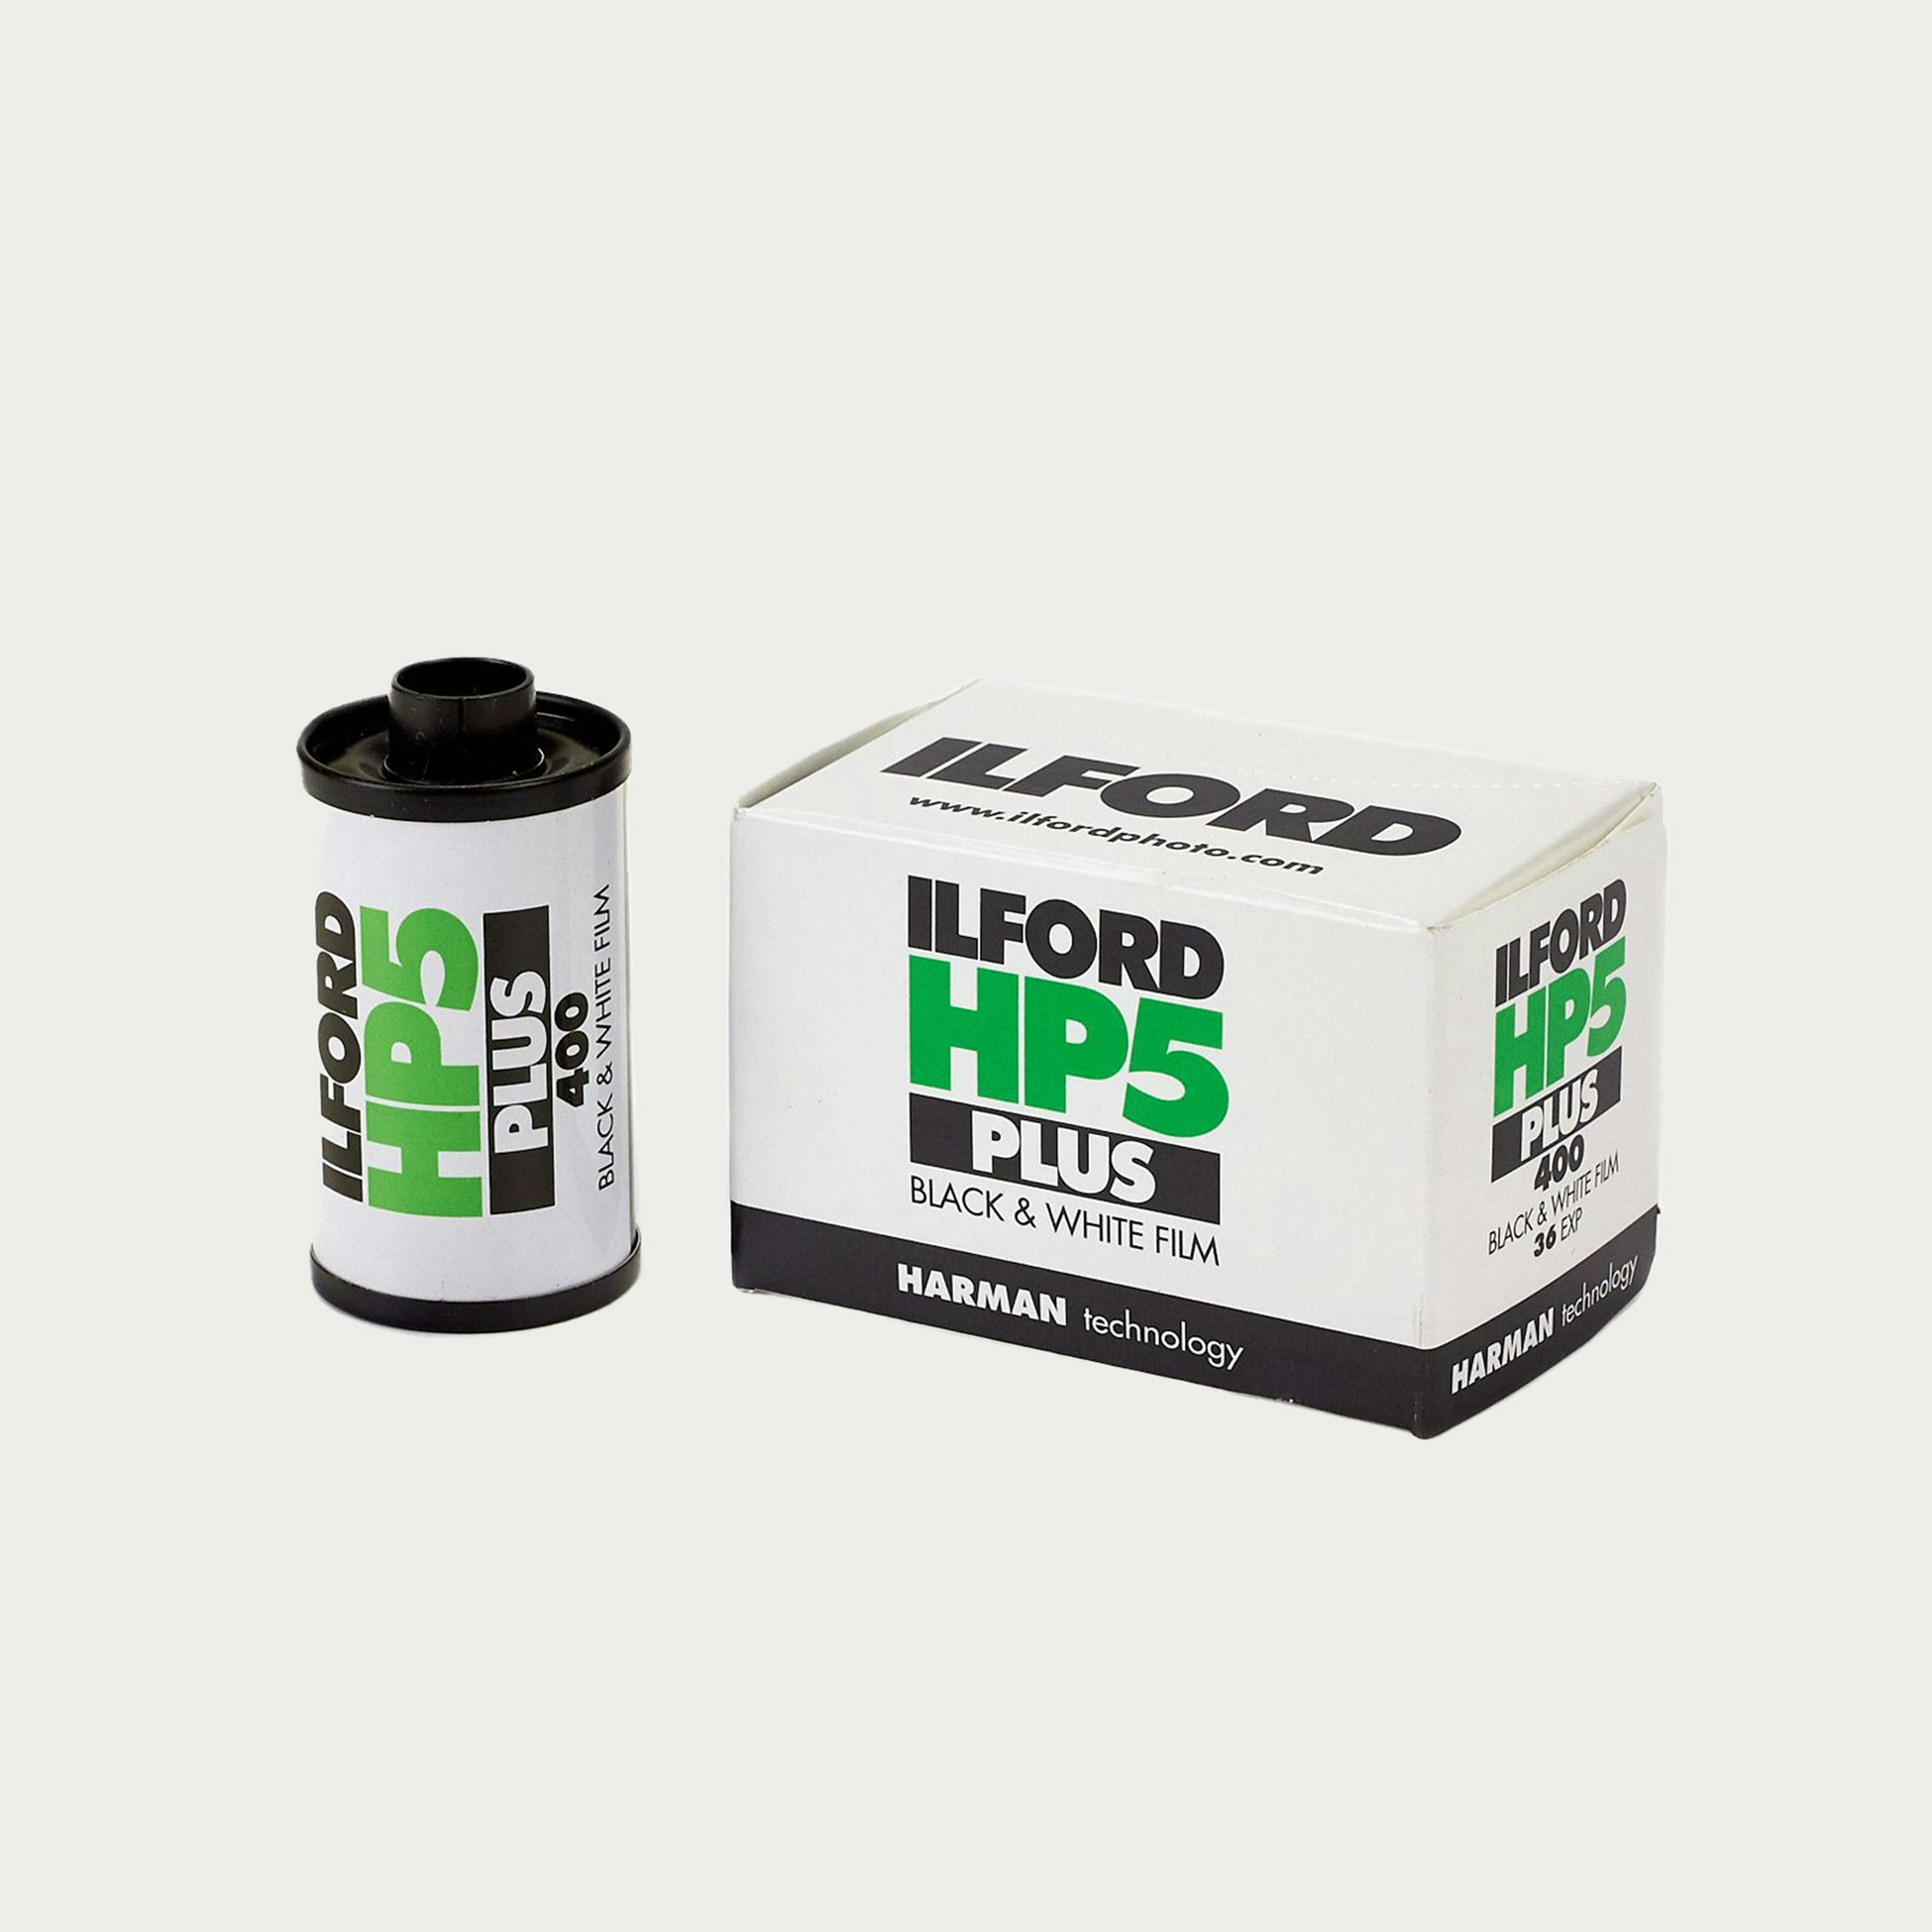 HP5 PLUS Black and White Negative 35mm Film (36 Exposures) - 24 Exp / Single Pack (1 Roll)